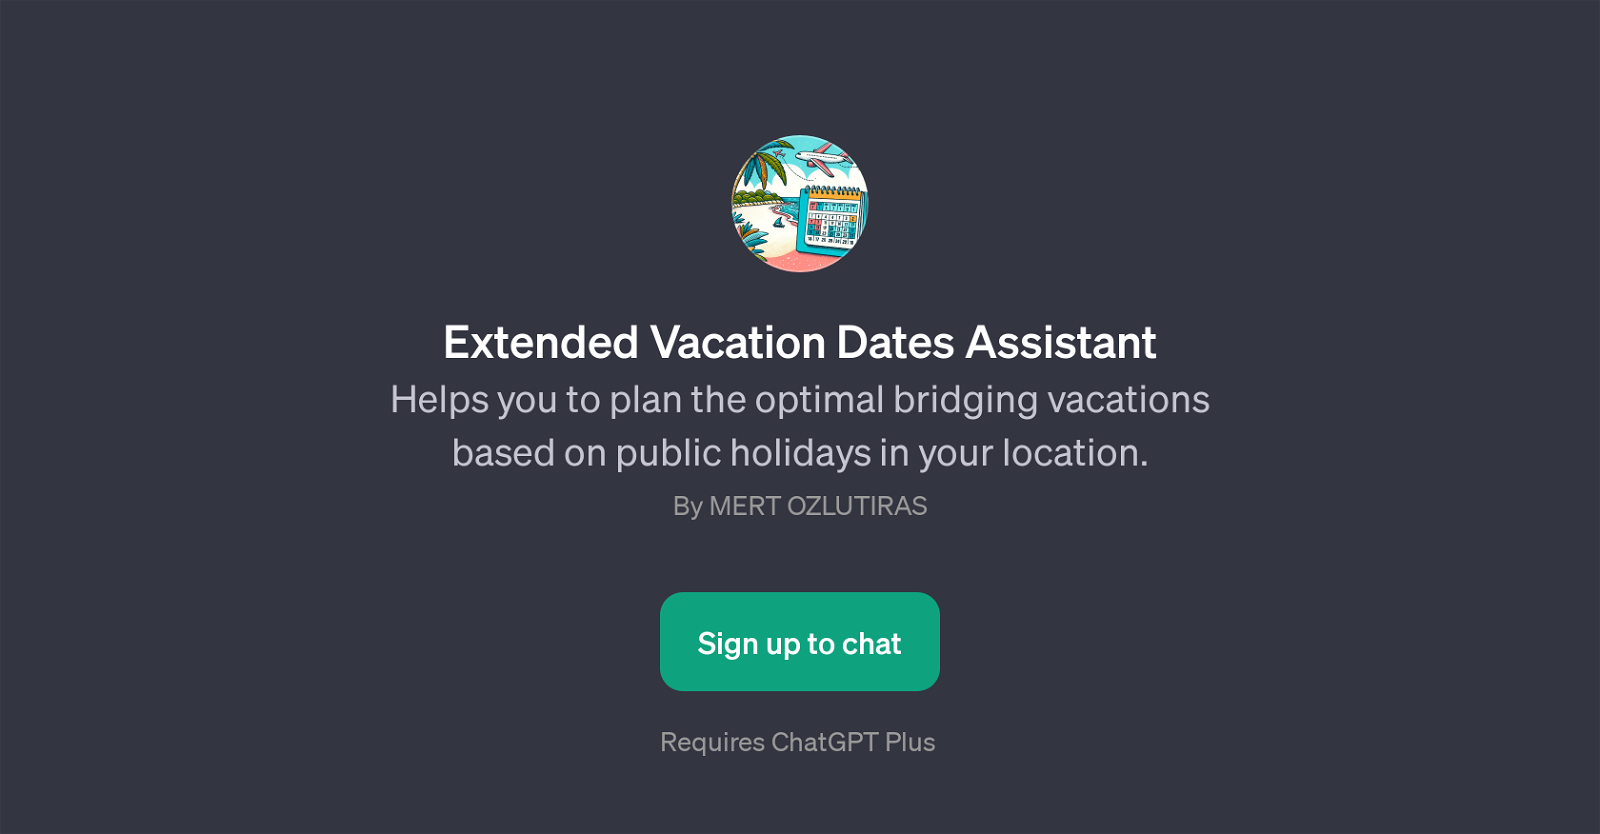 Extended Vacation Dates Assistant website